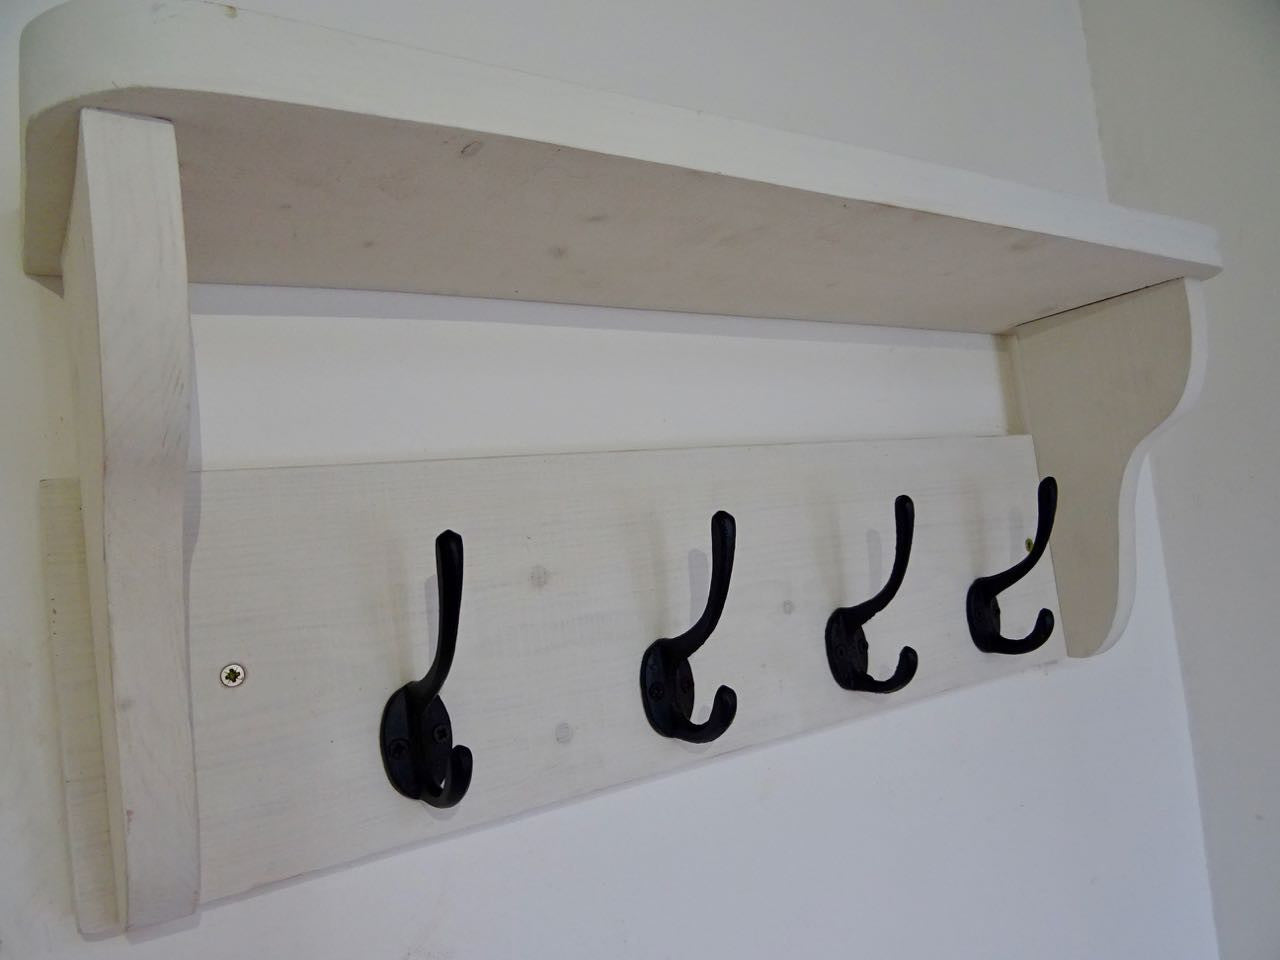 Rustic Hat / Coat Rack Complete With Shelf and 4 Cast Iron Hooks